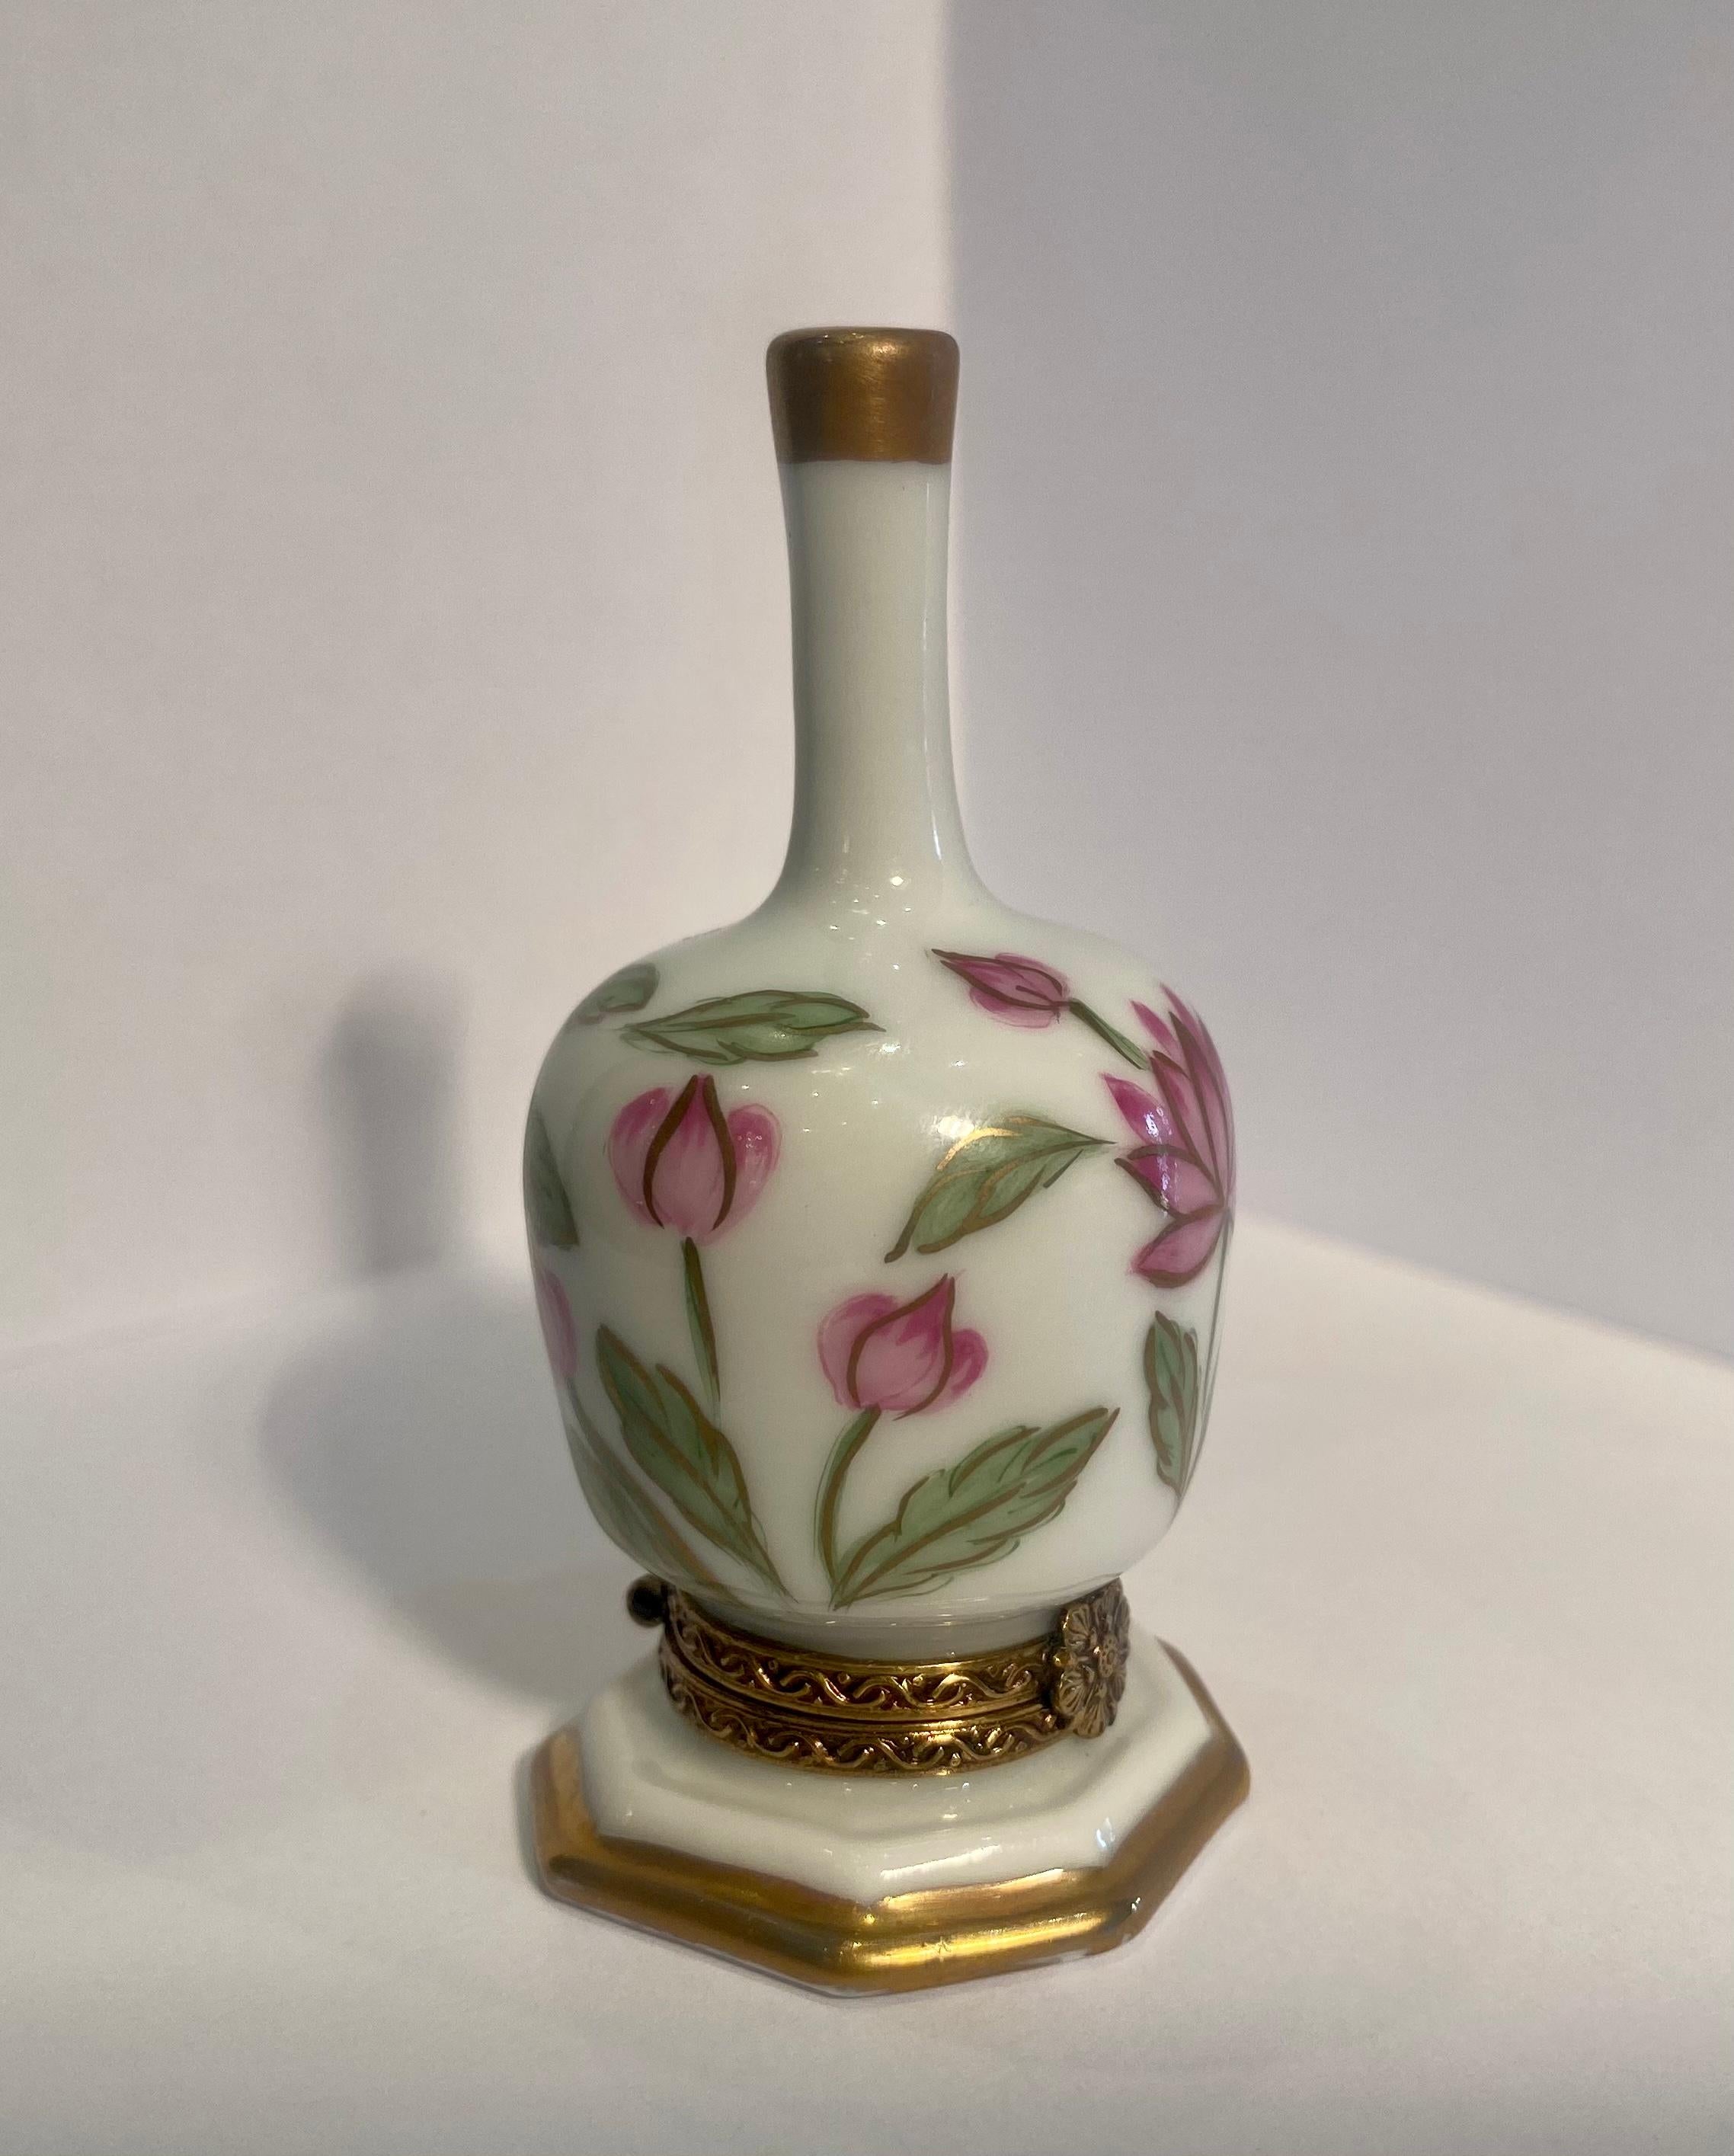 Collectible and very unique, Limoges porcelain miniature trinket box is handmade and hand painted in France and features beautiful multicolored pink tone lotus style flowers on the long neck vase shaped box. Accenting the box on the top of the neck